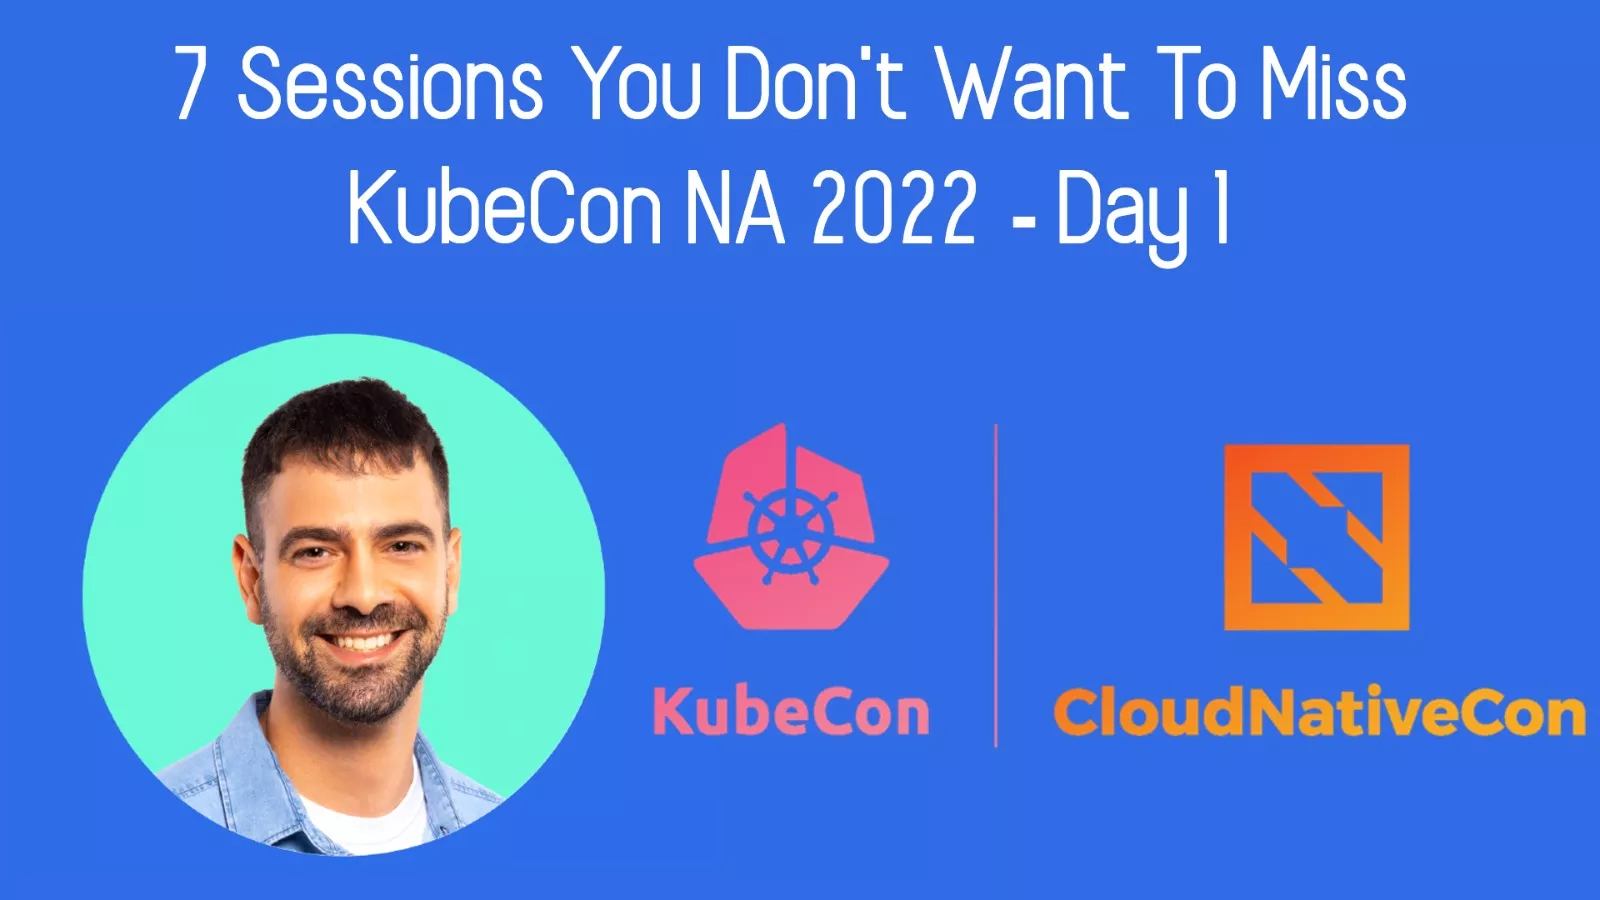 7 Sessions You Don’t Want To Miss In KubeCon 2022 Detroit